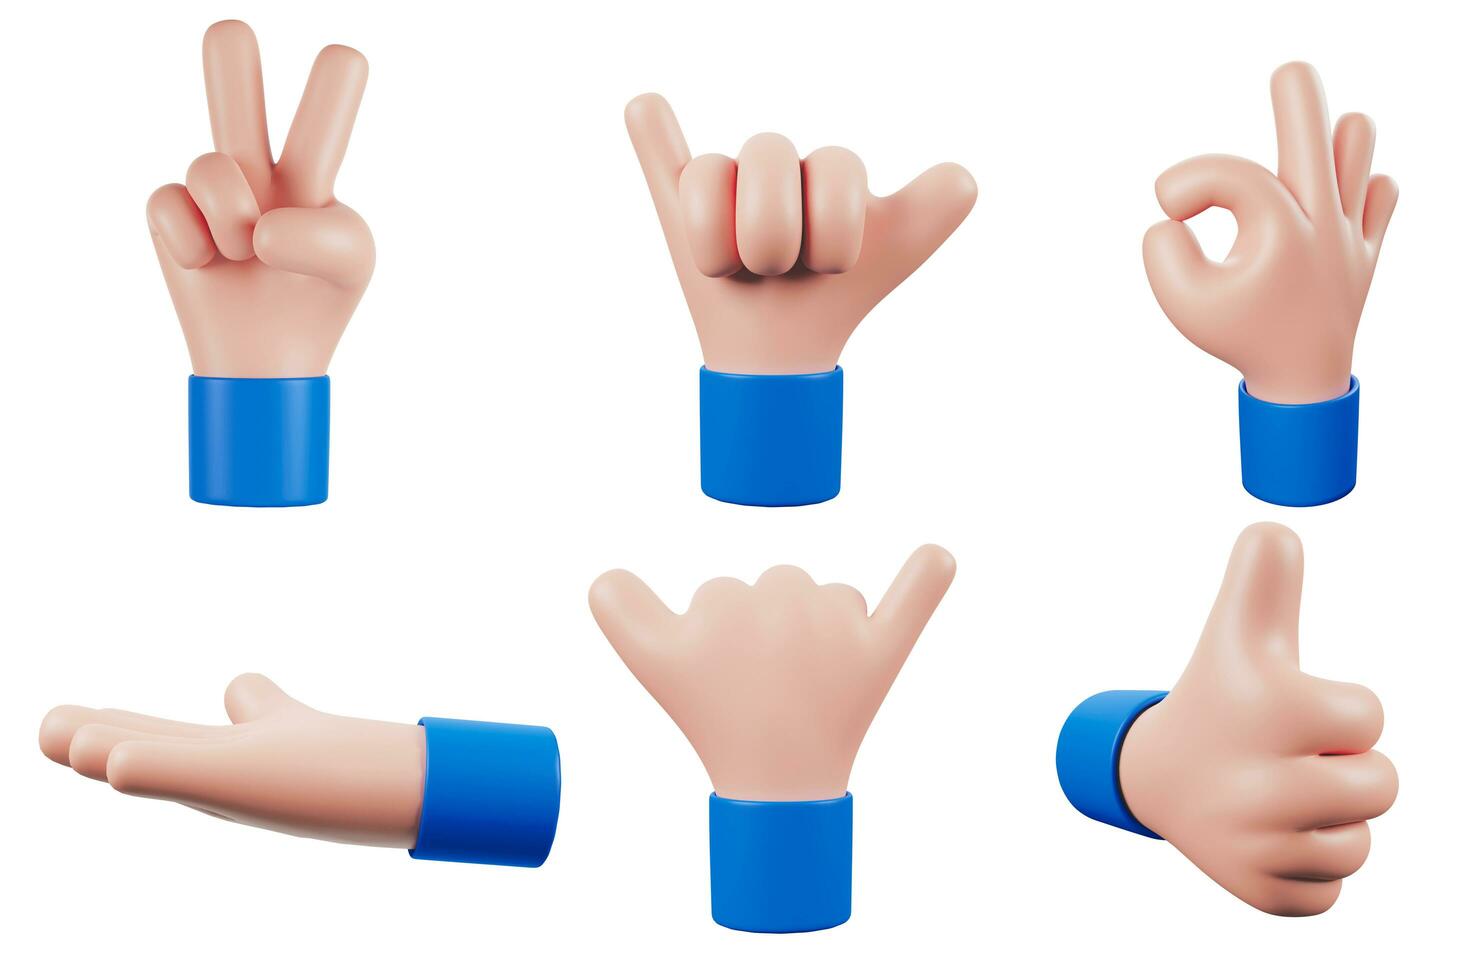 collection Hands Gesture, cartoon friendly, funny style isolated on white background, 3D rendered image. photo